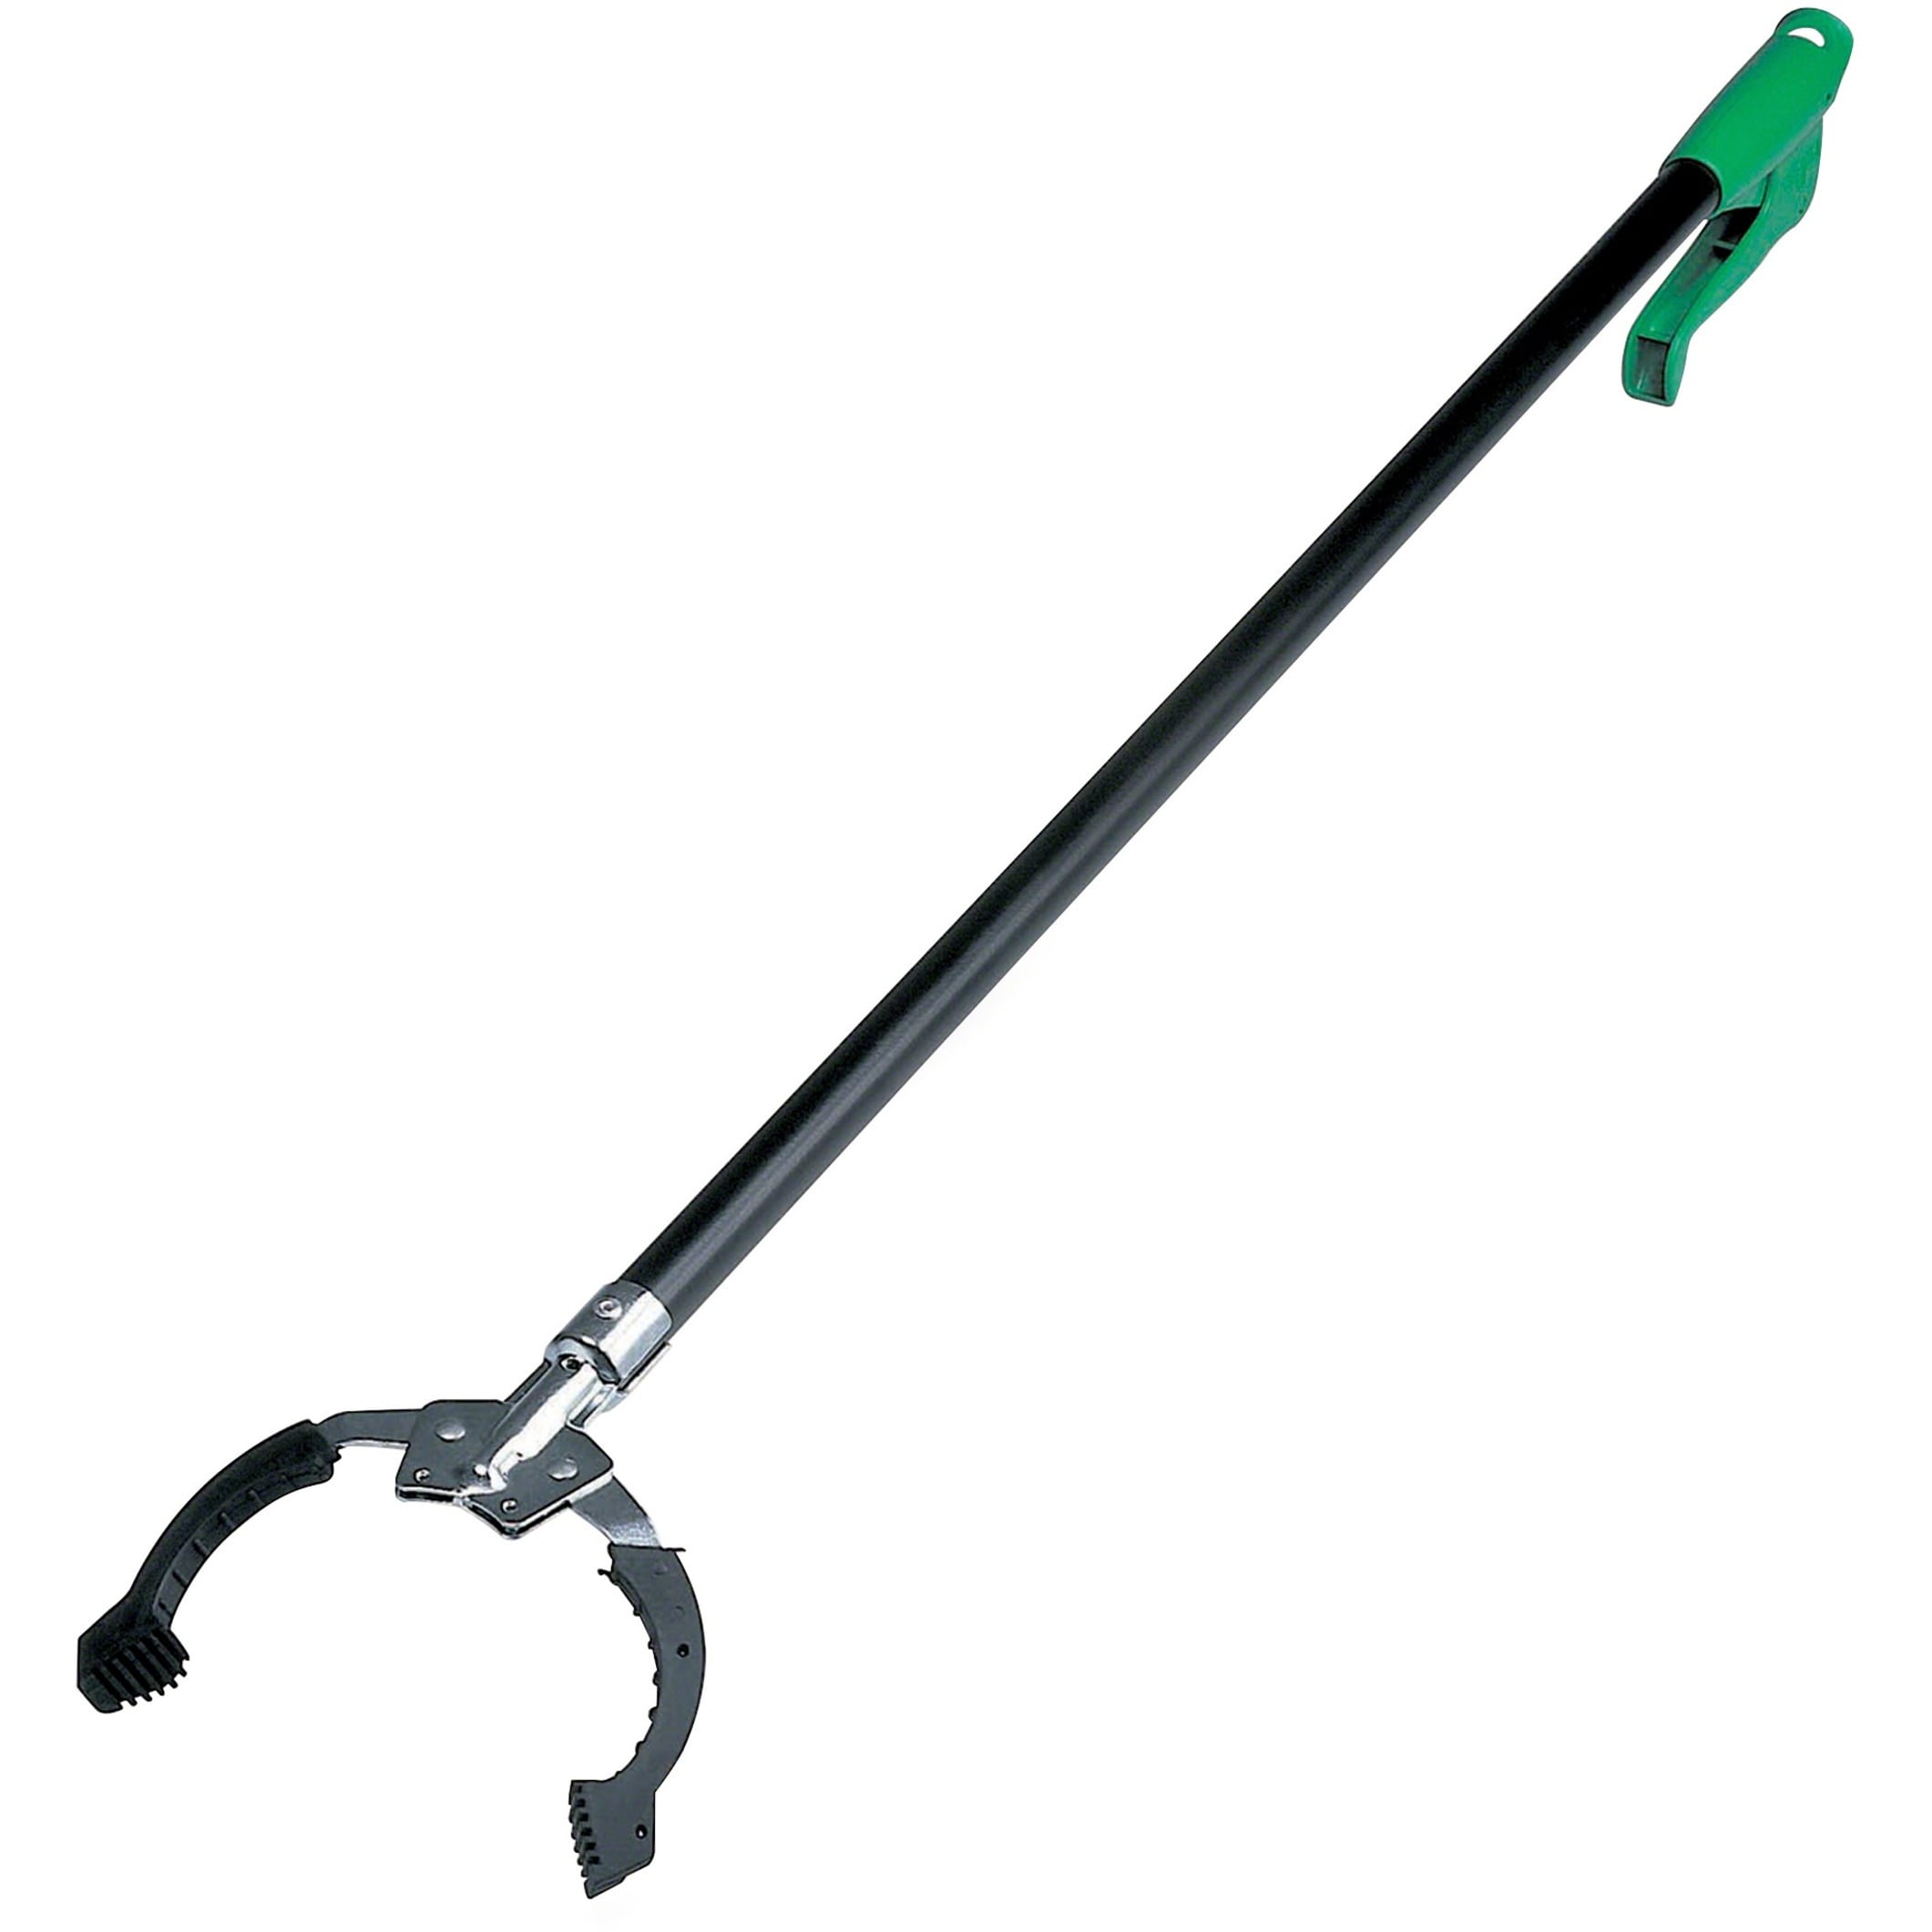 Rampro 22 inch Flexible Grabber Pickup Tool, Retractable Claw Retriever Stick, Snake & Cable Aid, Use to Grab Trash & a Drain Auger to Unclog Hair